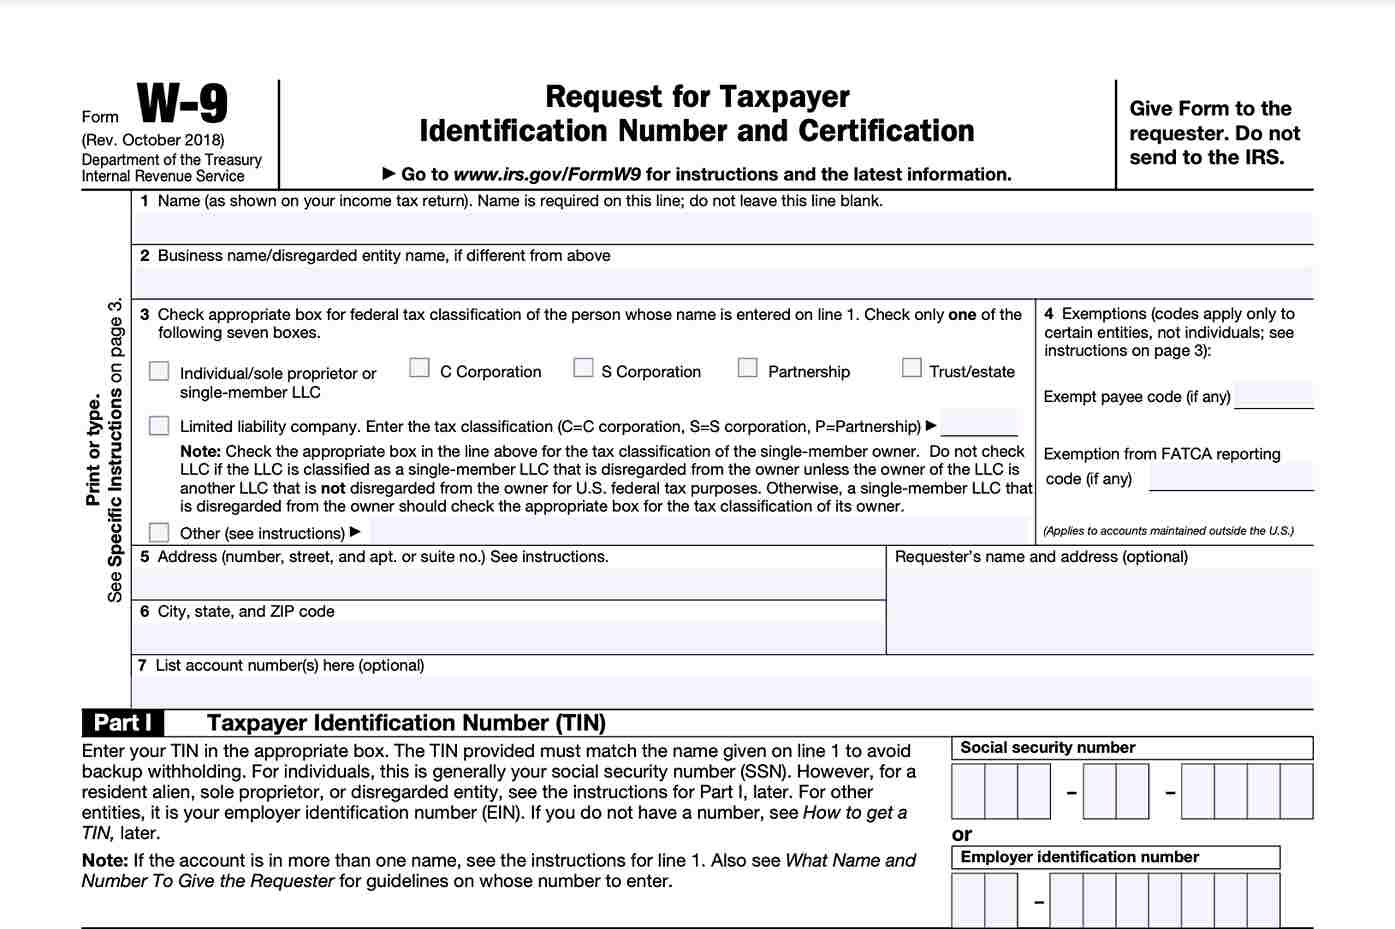 Form W-9 - What Is It And How Is It Used? - Turbotax Tax Tips &amp;amp; Videos pertaining to W9 Form Vs W2